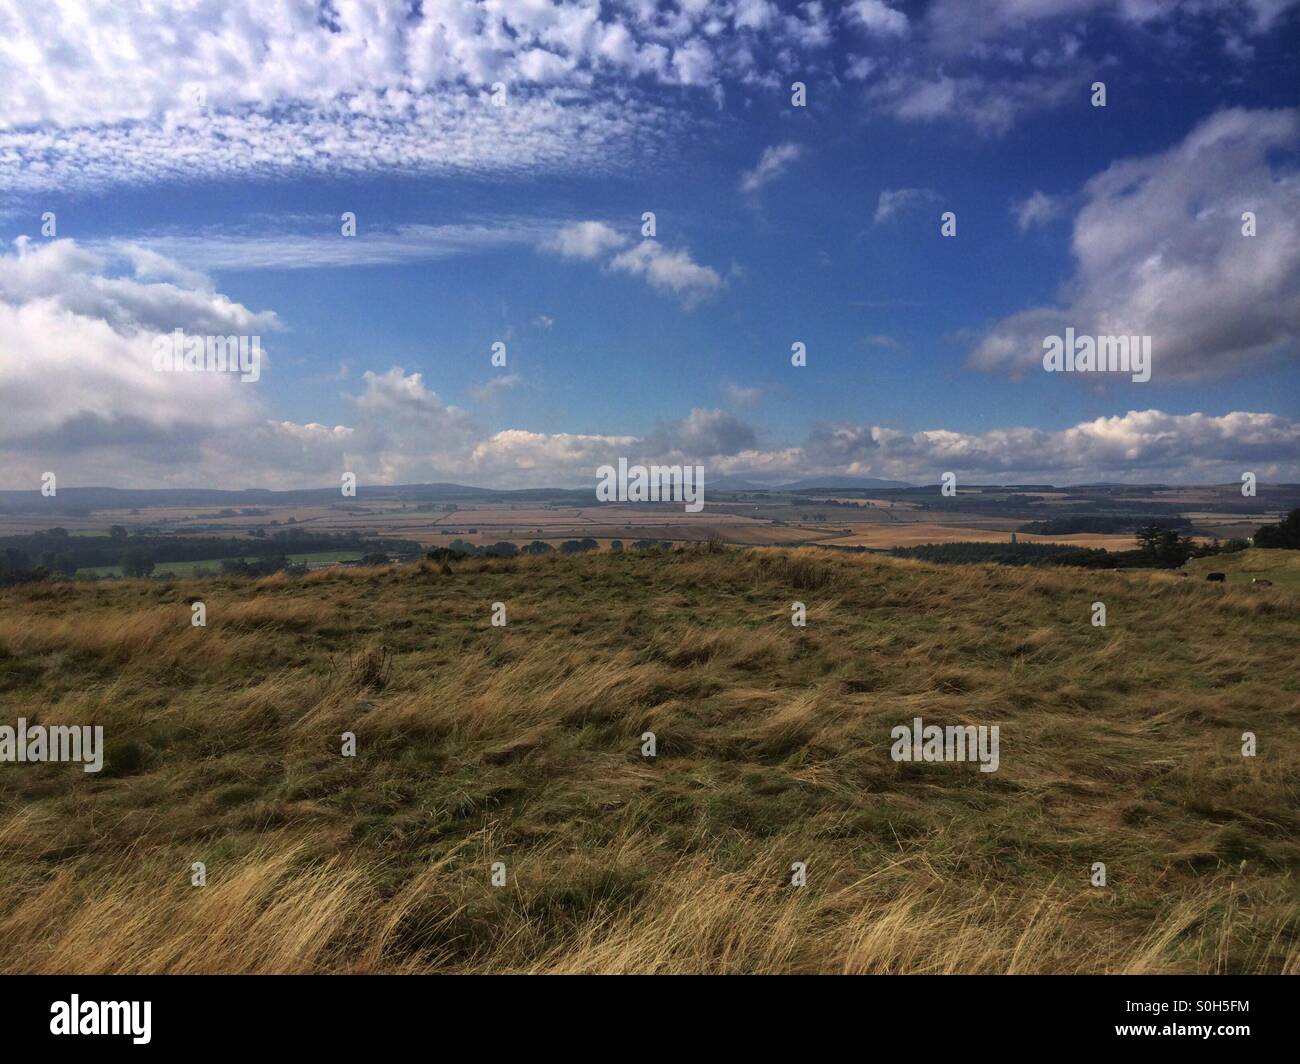 A clear view across grassy moorland and colourful skies Stock Photo